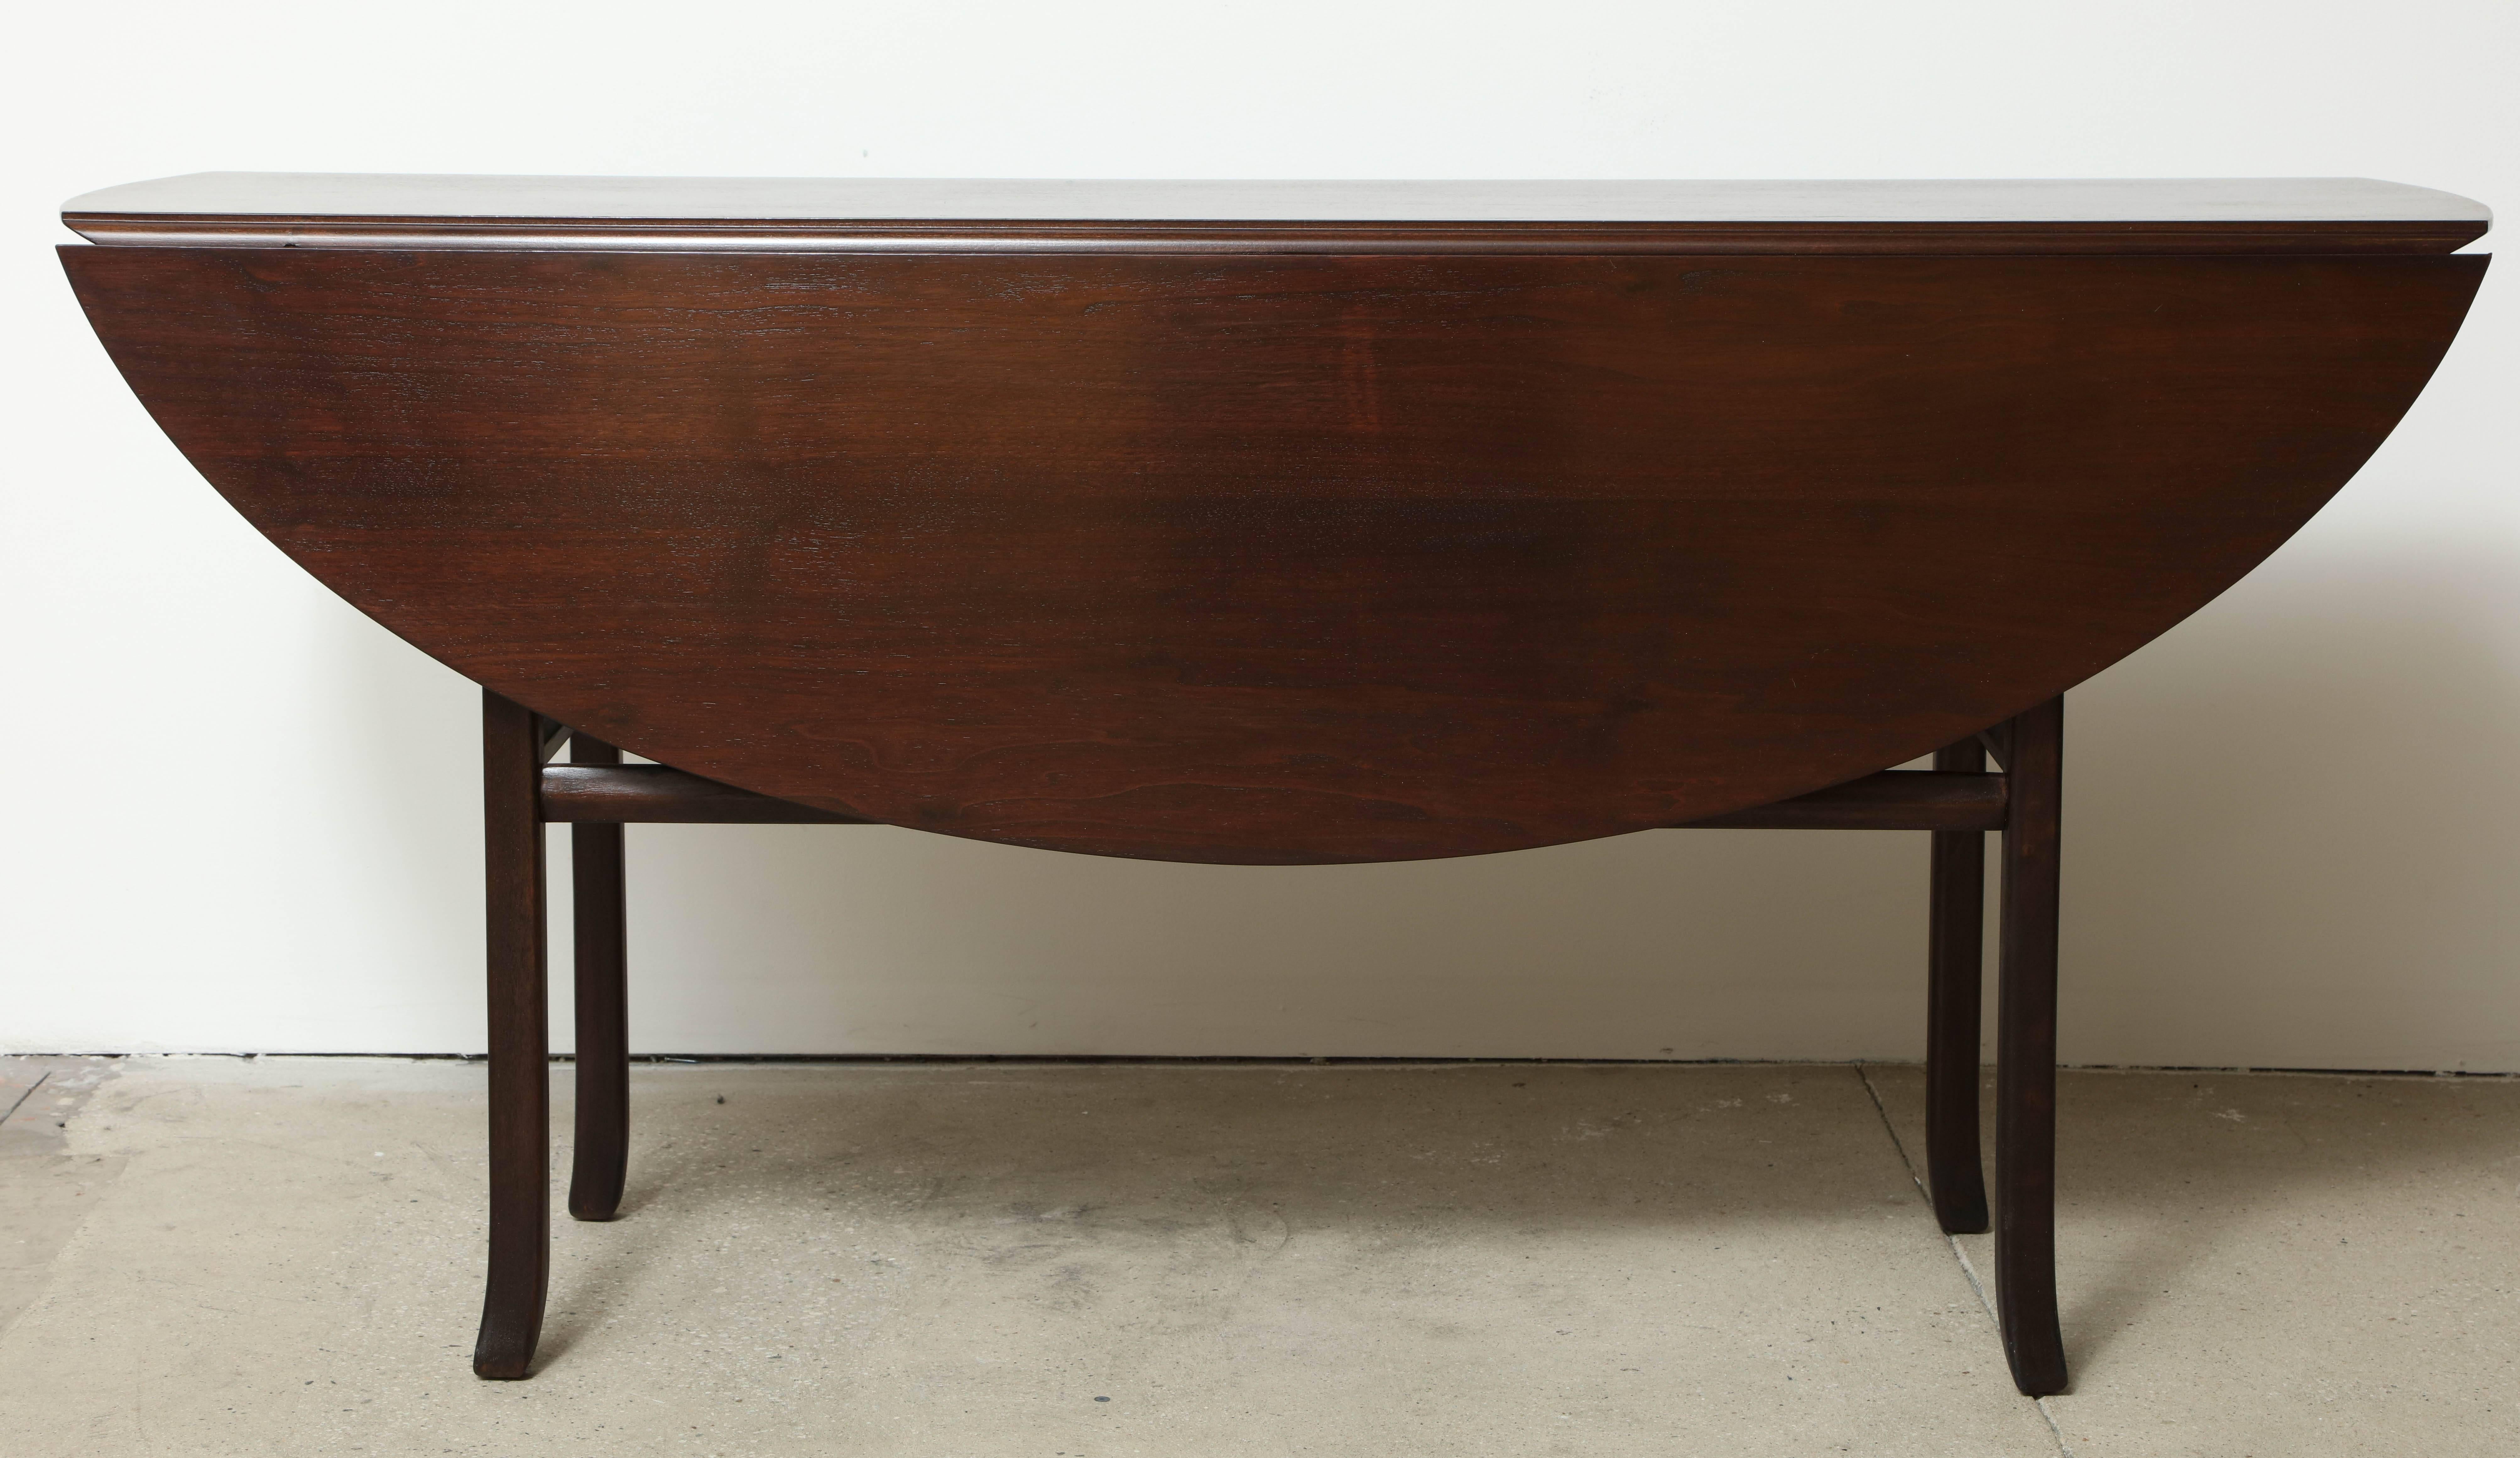 North American Double Drop-Leaf Console